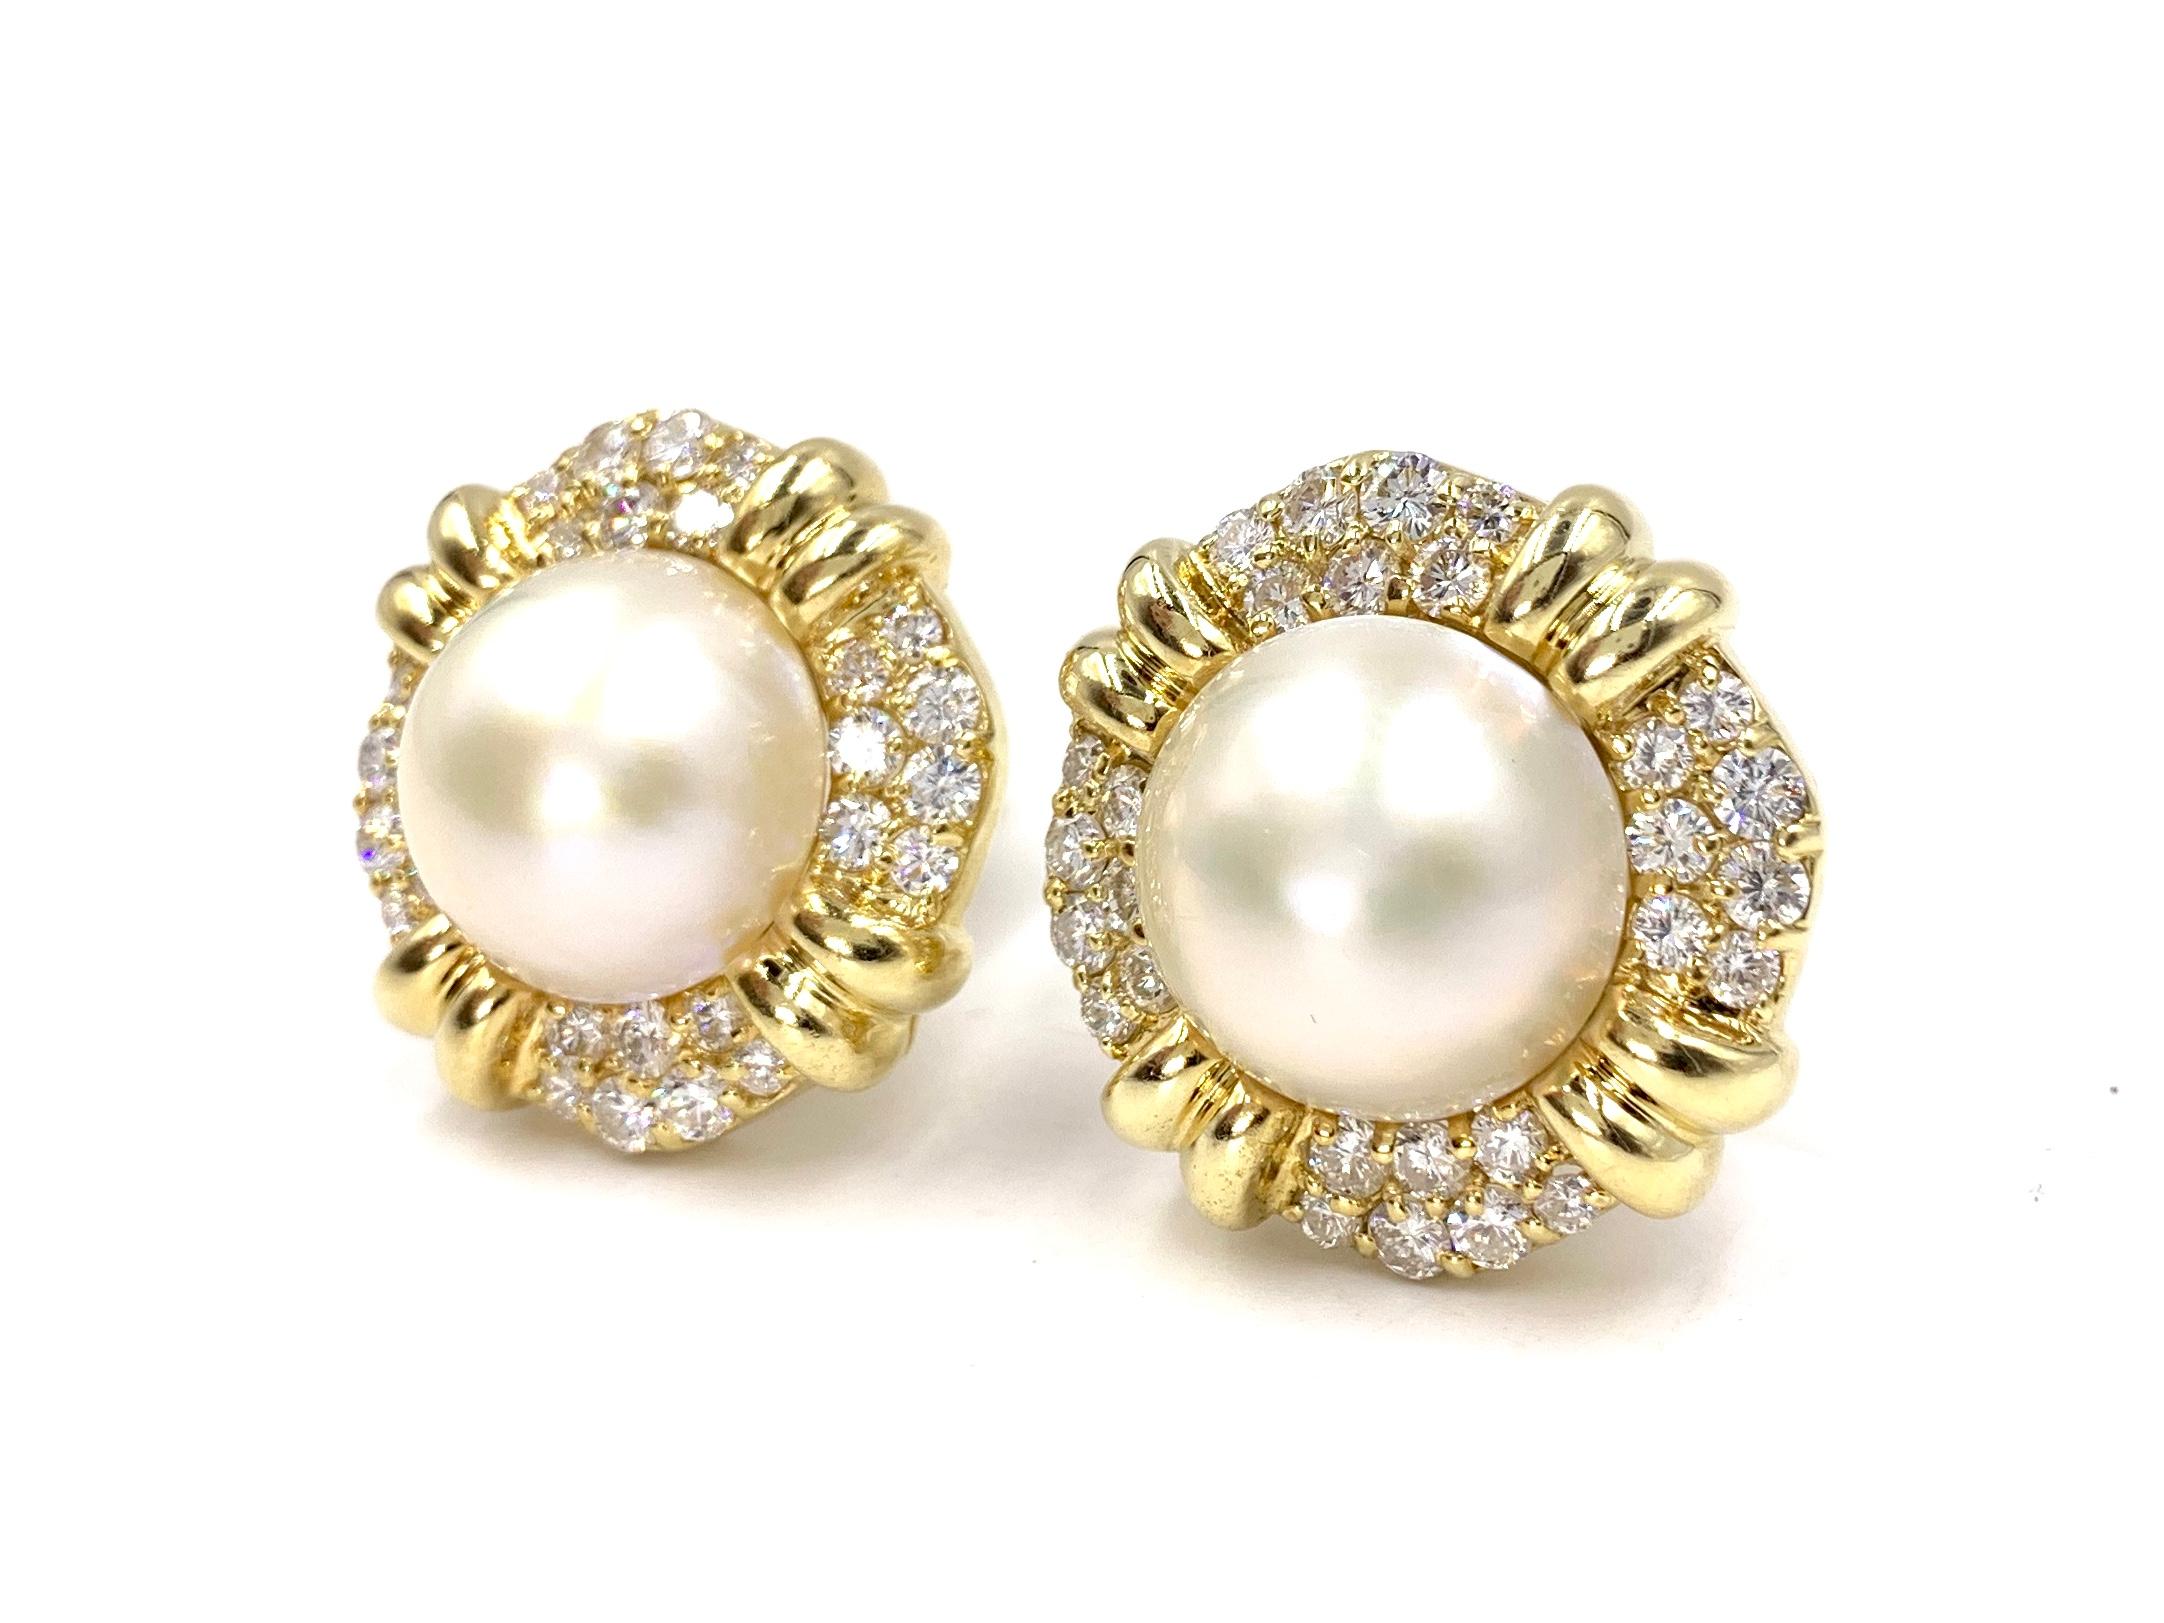 Very well made, substantial 18 karat yellow gold button clip-on earrings featuring 17mm smooth mabe pearls surrounded by approximately 3.25 carats of high quality round brilliant white diamonds. Diamonds are approximately F-G color, VS2 clarity.